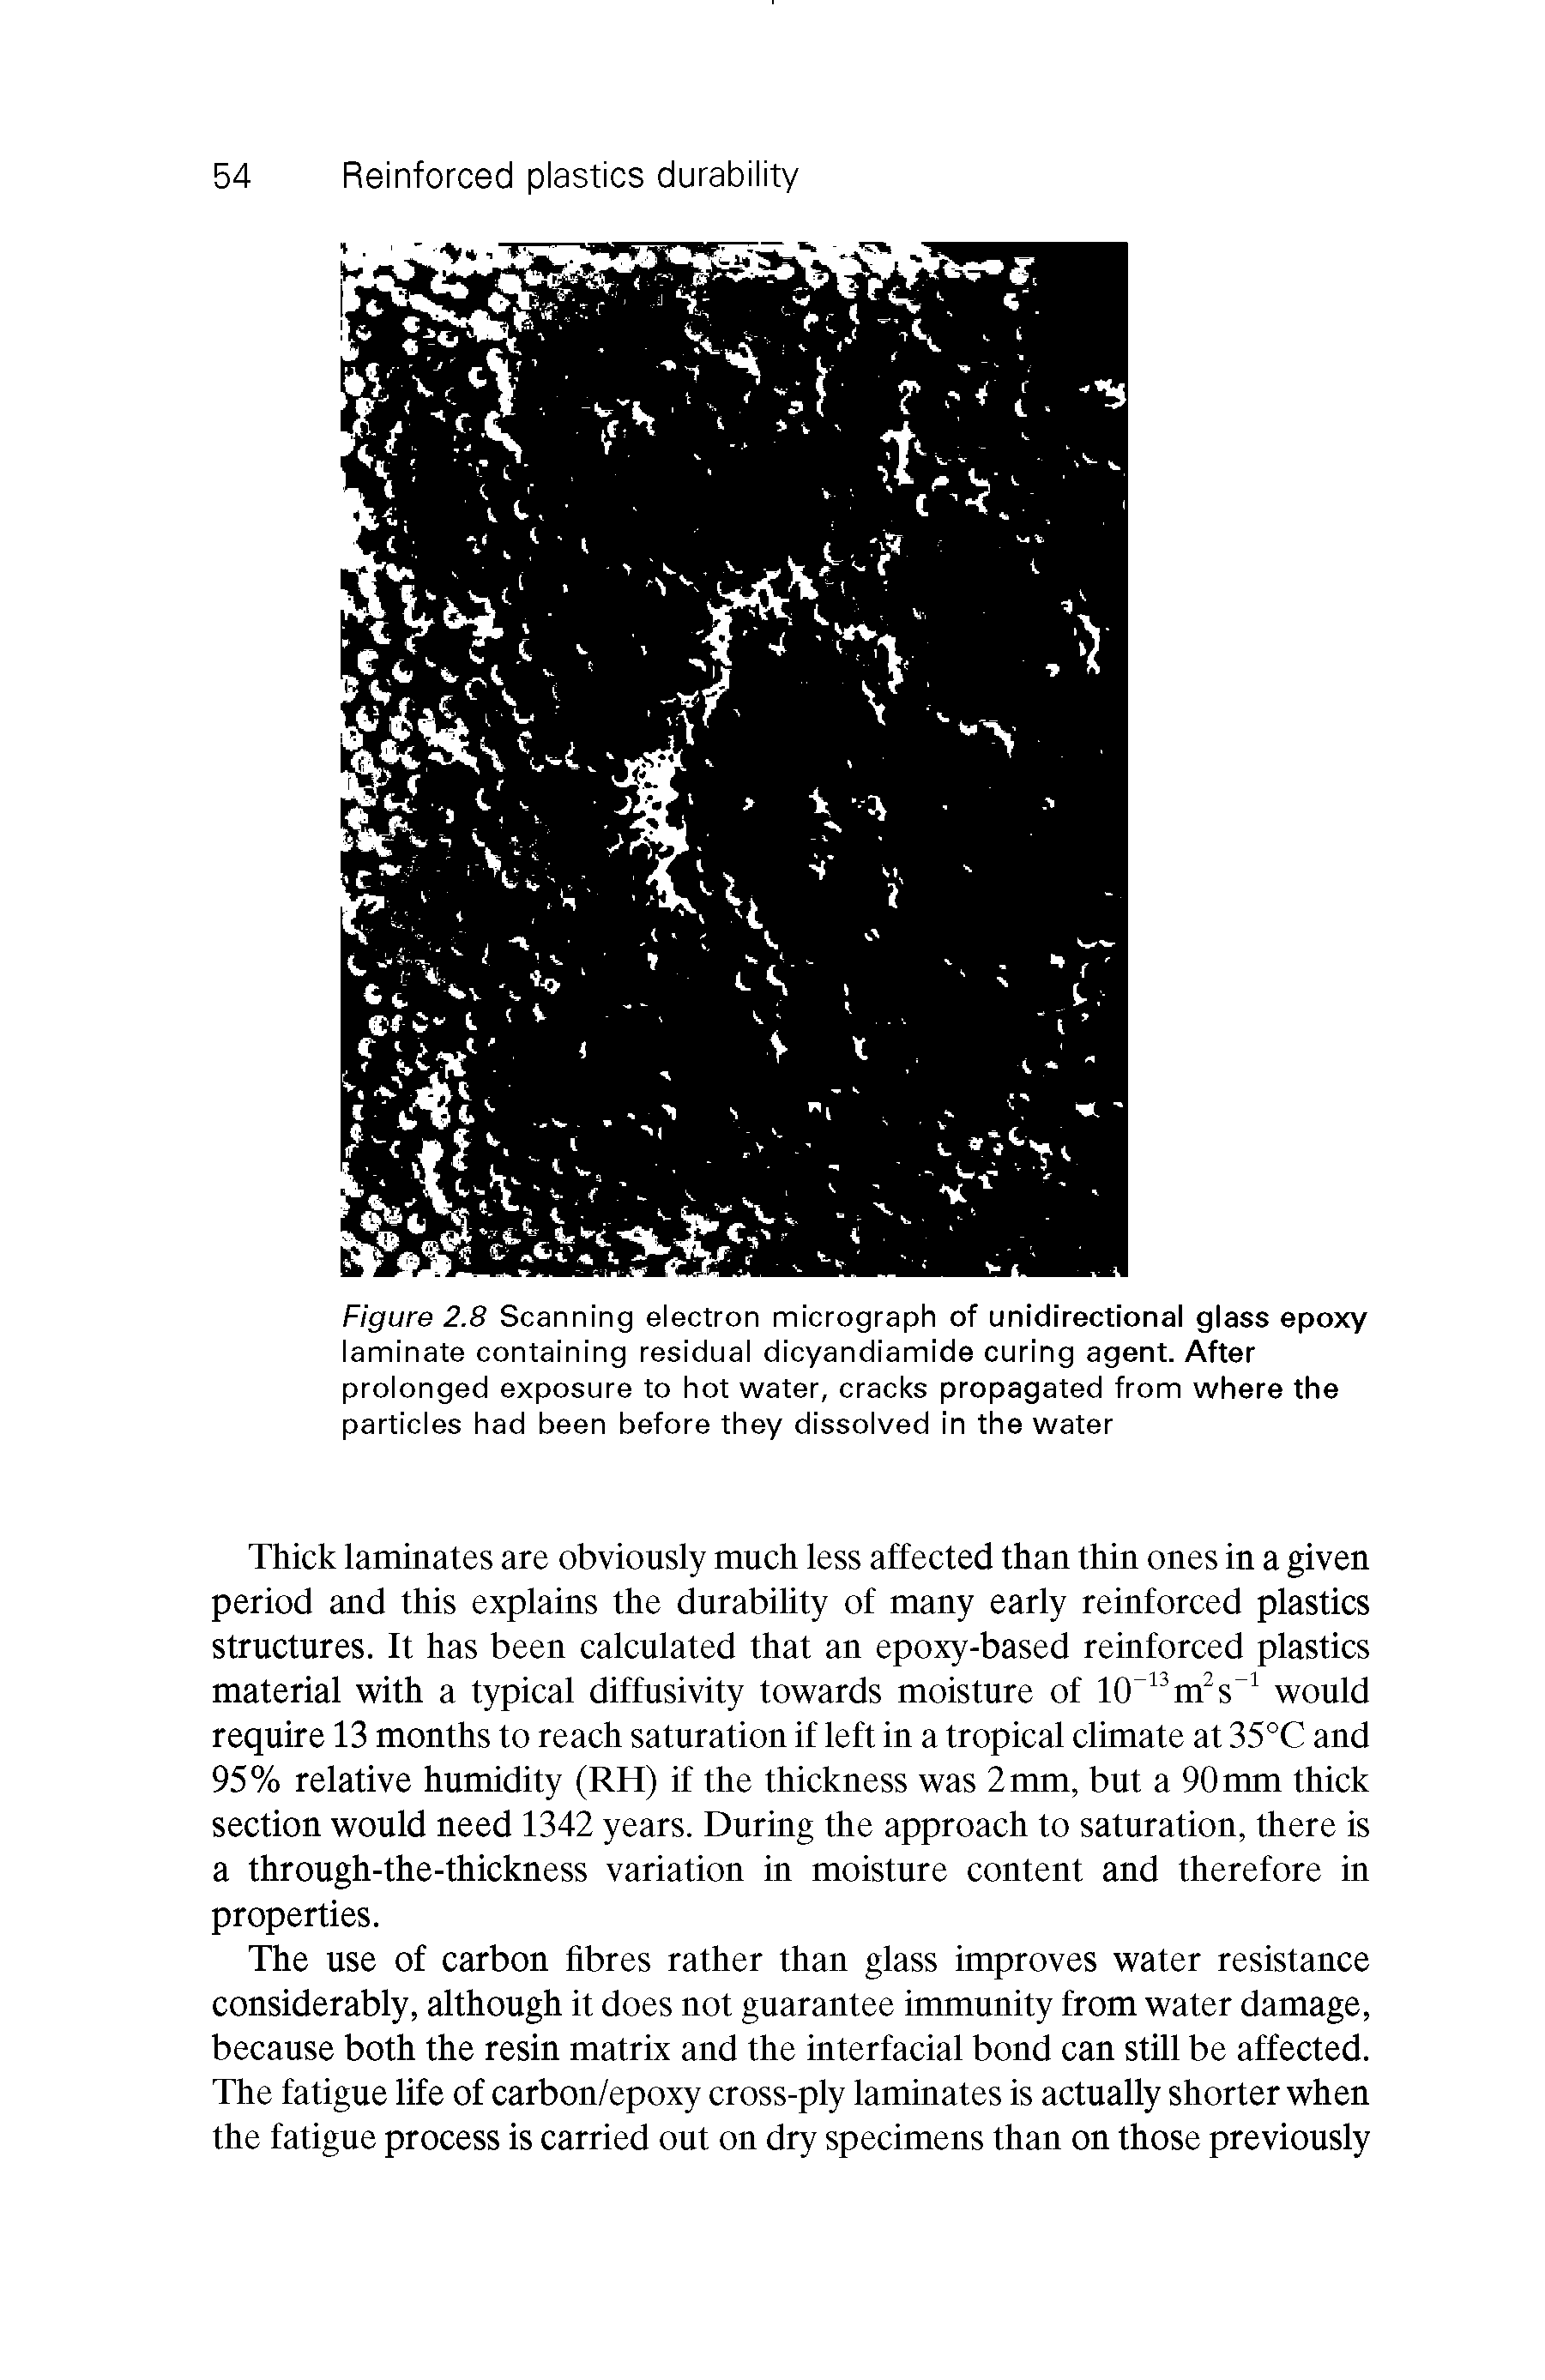 Figure 2.8 Scanning electron micrograph of unidirectional glass epoxy laminate containing residual dicyandiamide curing agent. After prolonged exposure to hot water, cracks propagated from where the particles had been before they dissolved in the water...